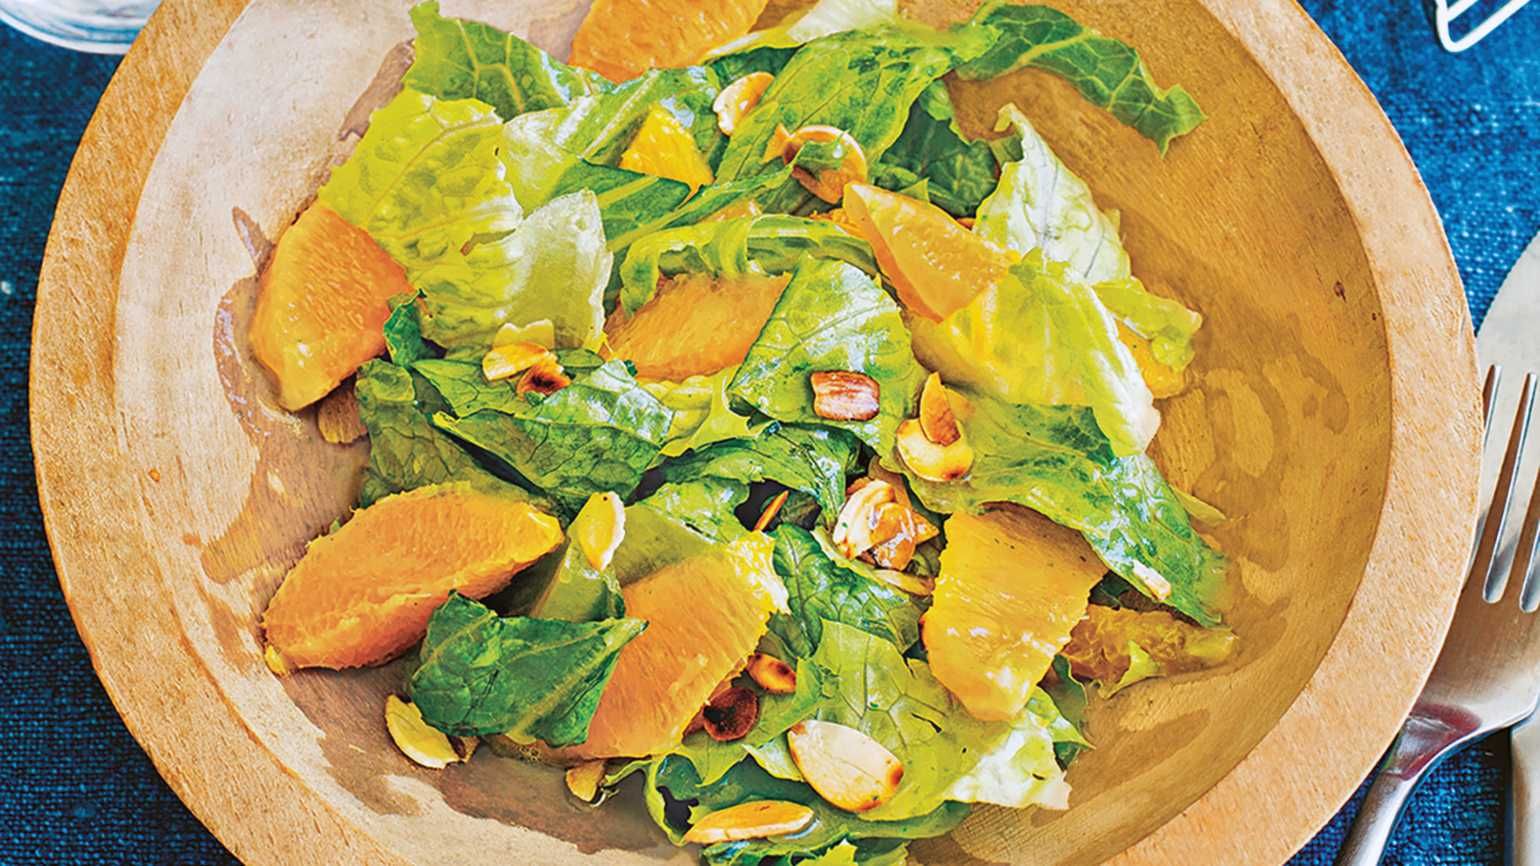 Orange-Almond Salad with Sweet Serrano-Lime Dressing (photo by Angie Mosier)